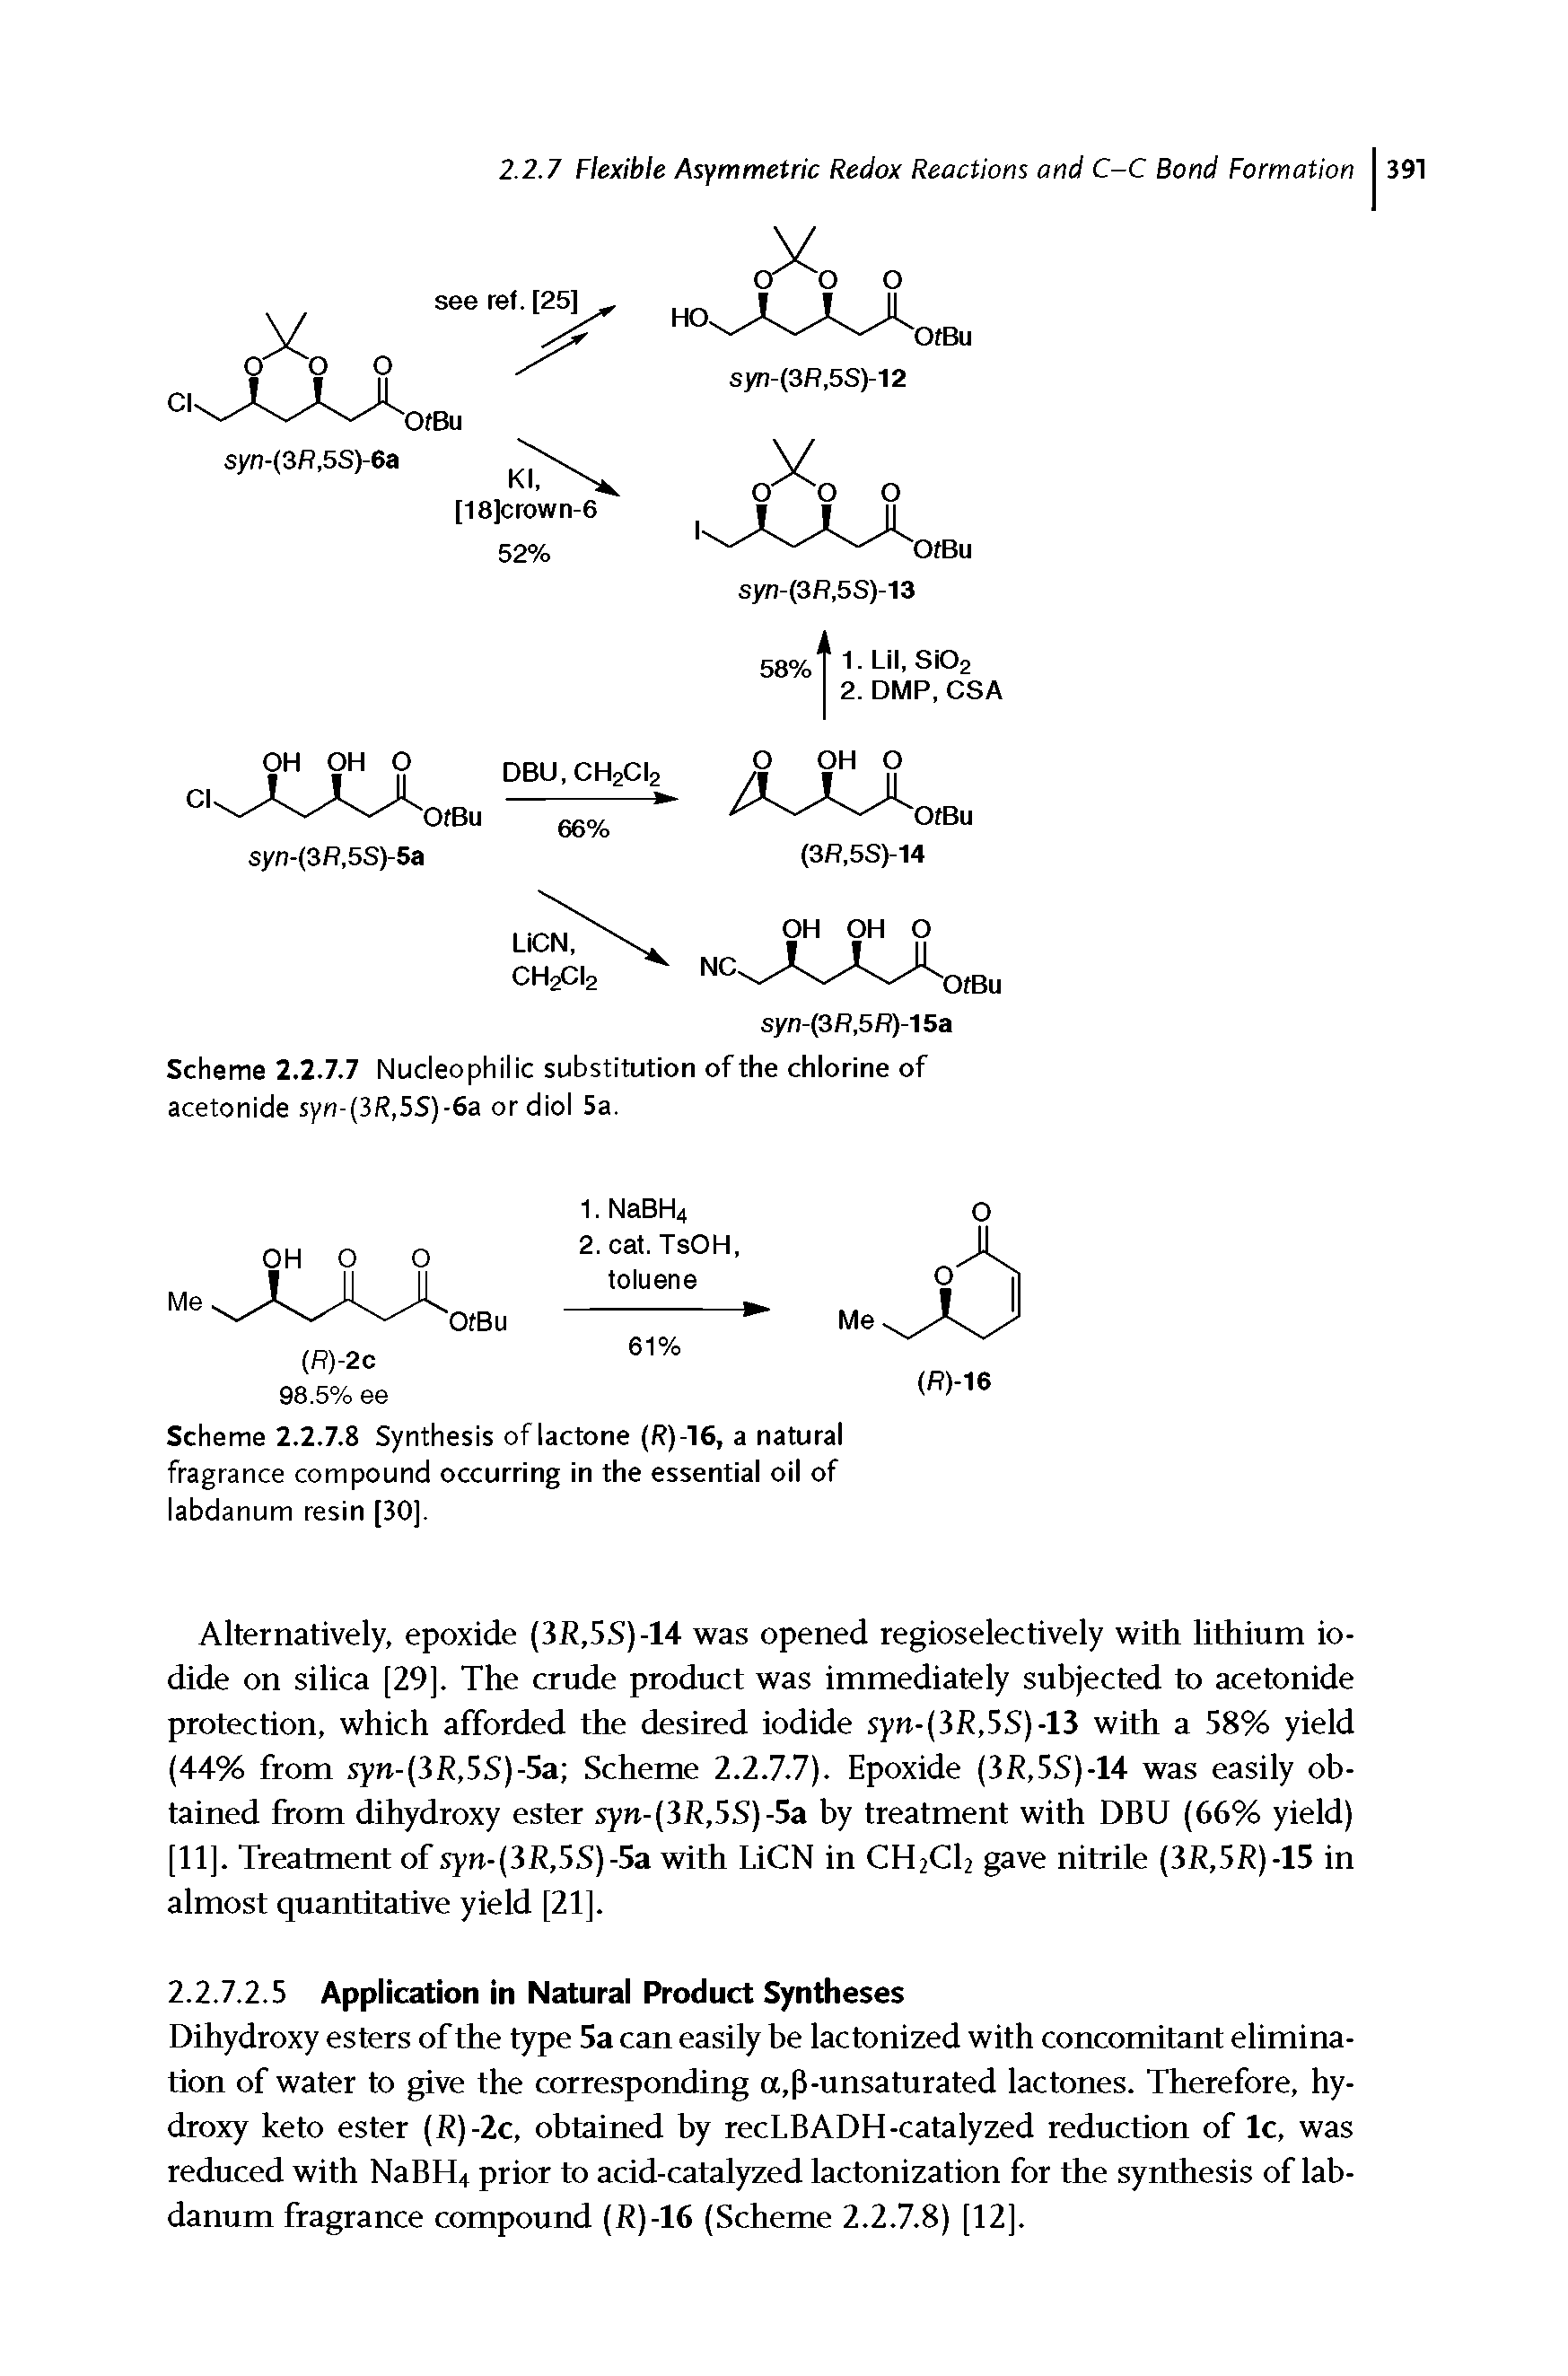 Scheme 2.2.7.8 Synthesis of lactone (R) -16, a natural fragrance compound occurring in the essential oil of labdanum resin [30].